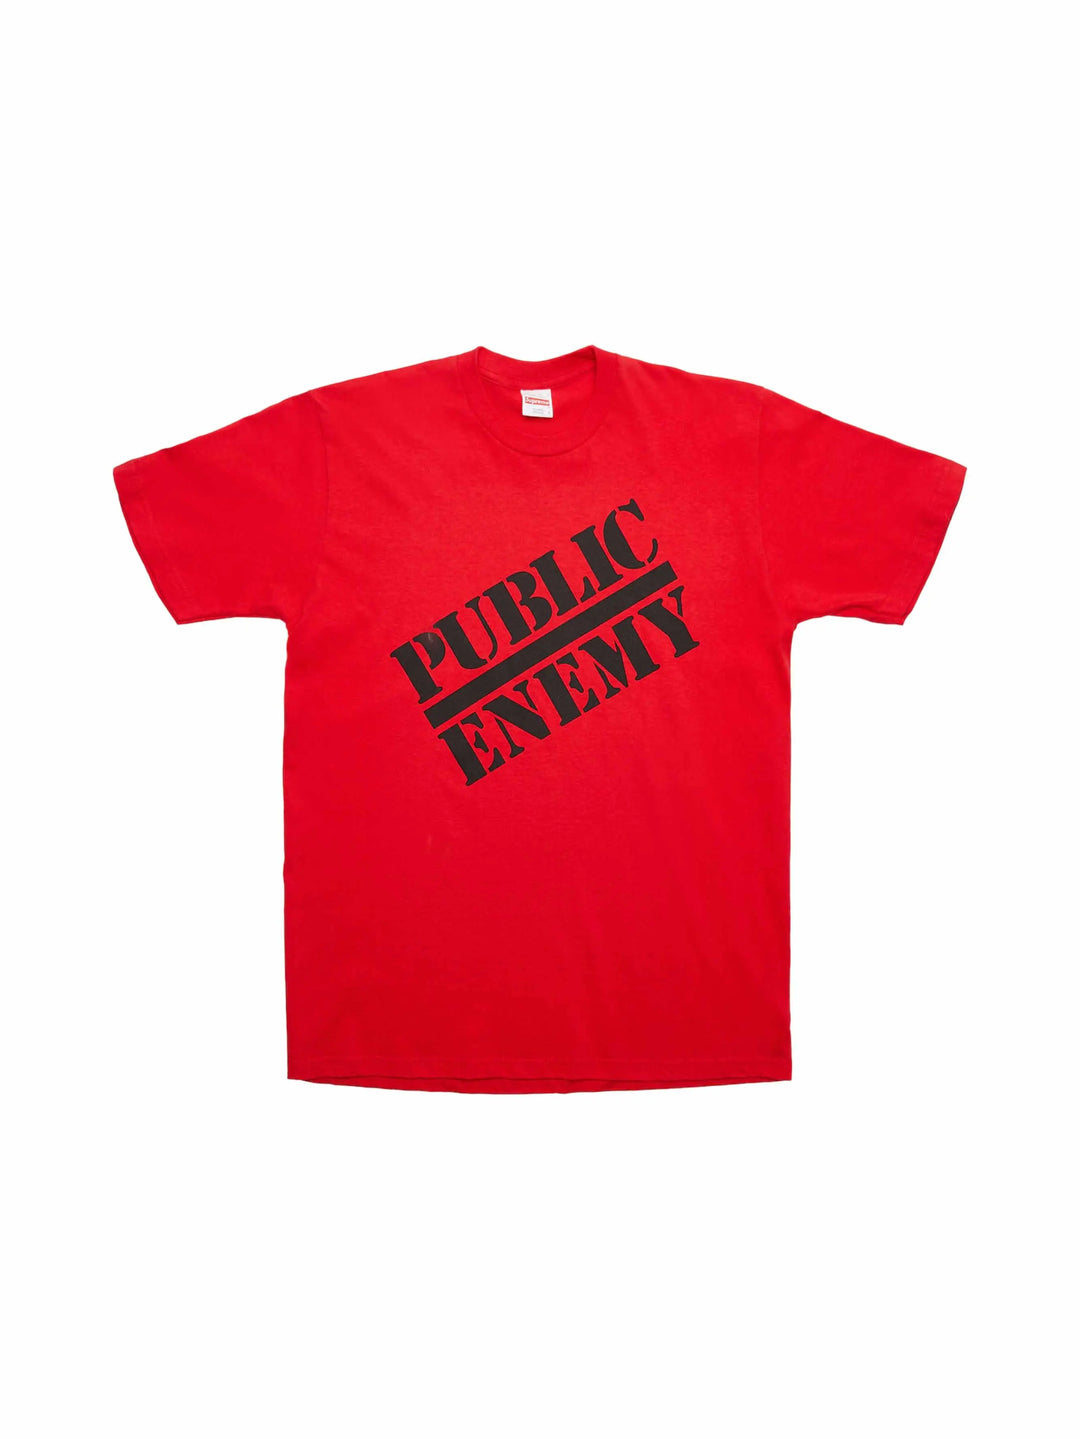 Supreme UNDERCOVER/Public Enemy Tee Red in Auckland, New Zealand - Shop name